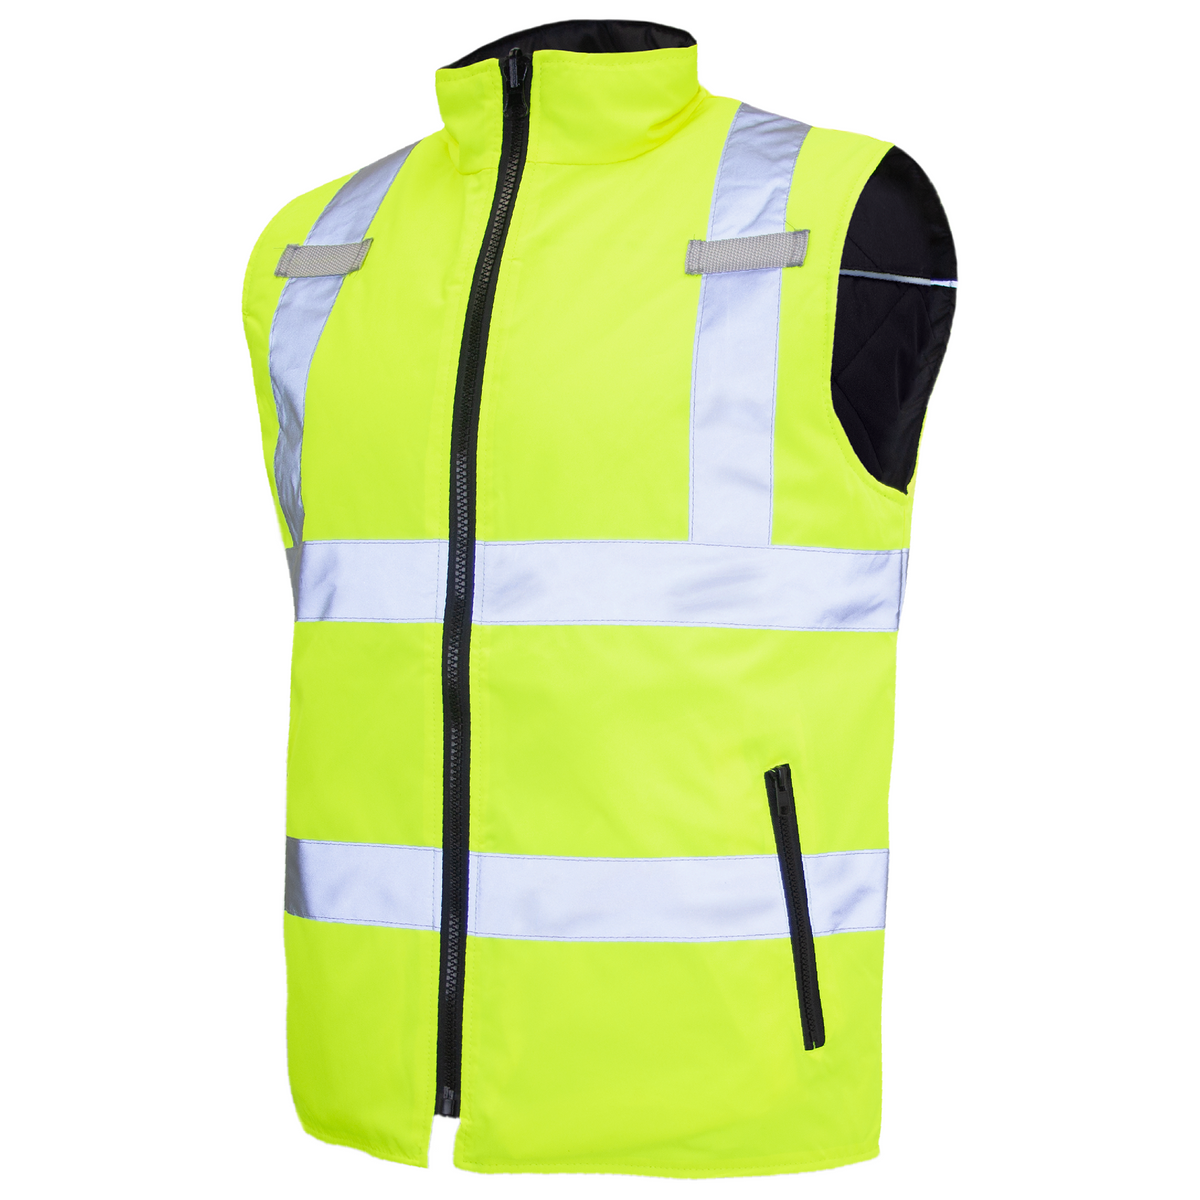 What is High Visibility Clothing?